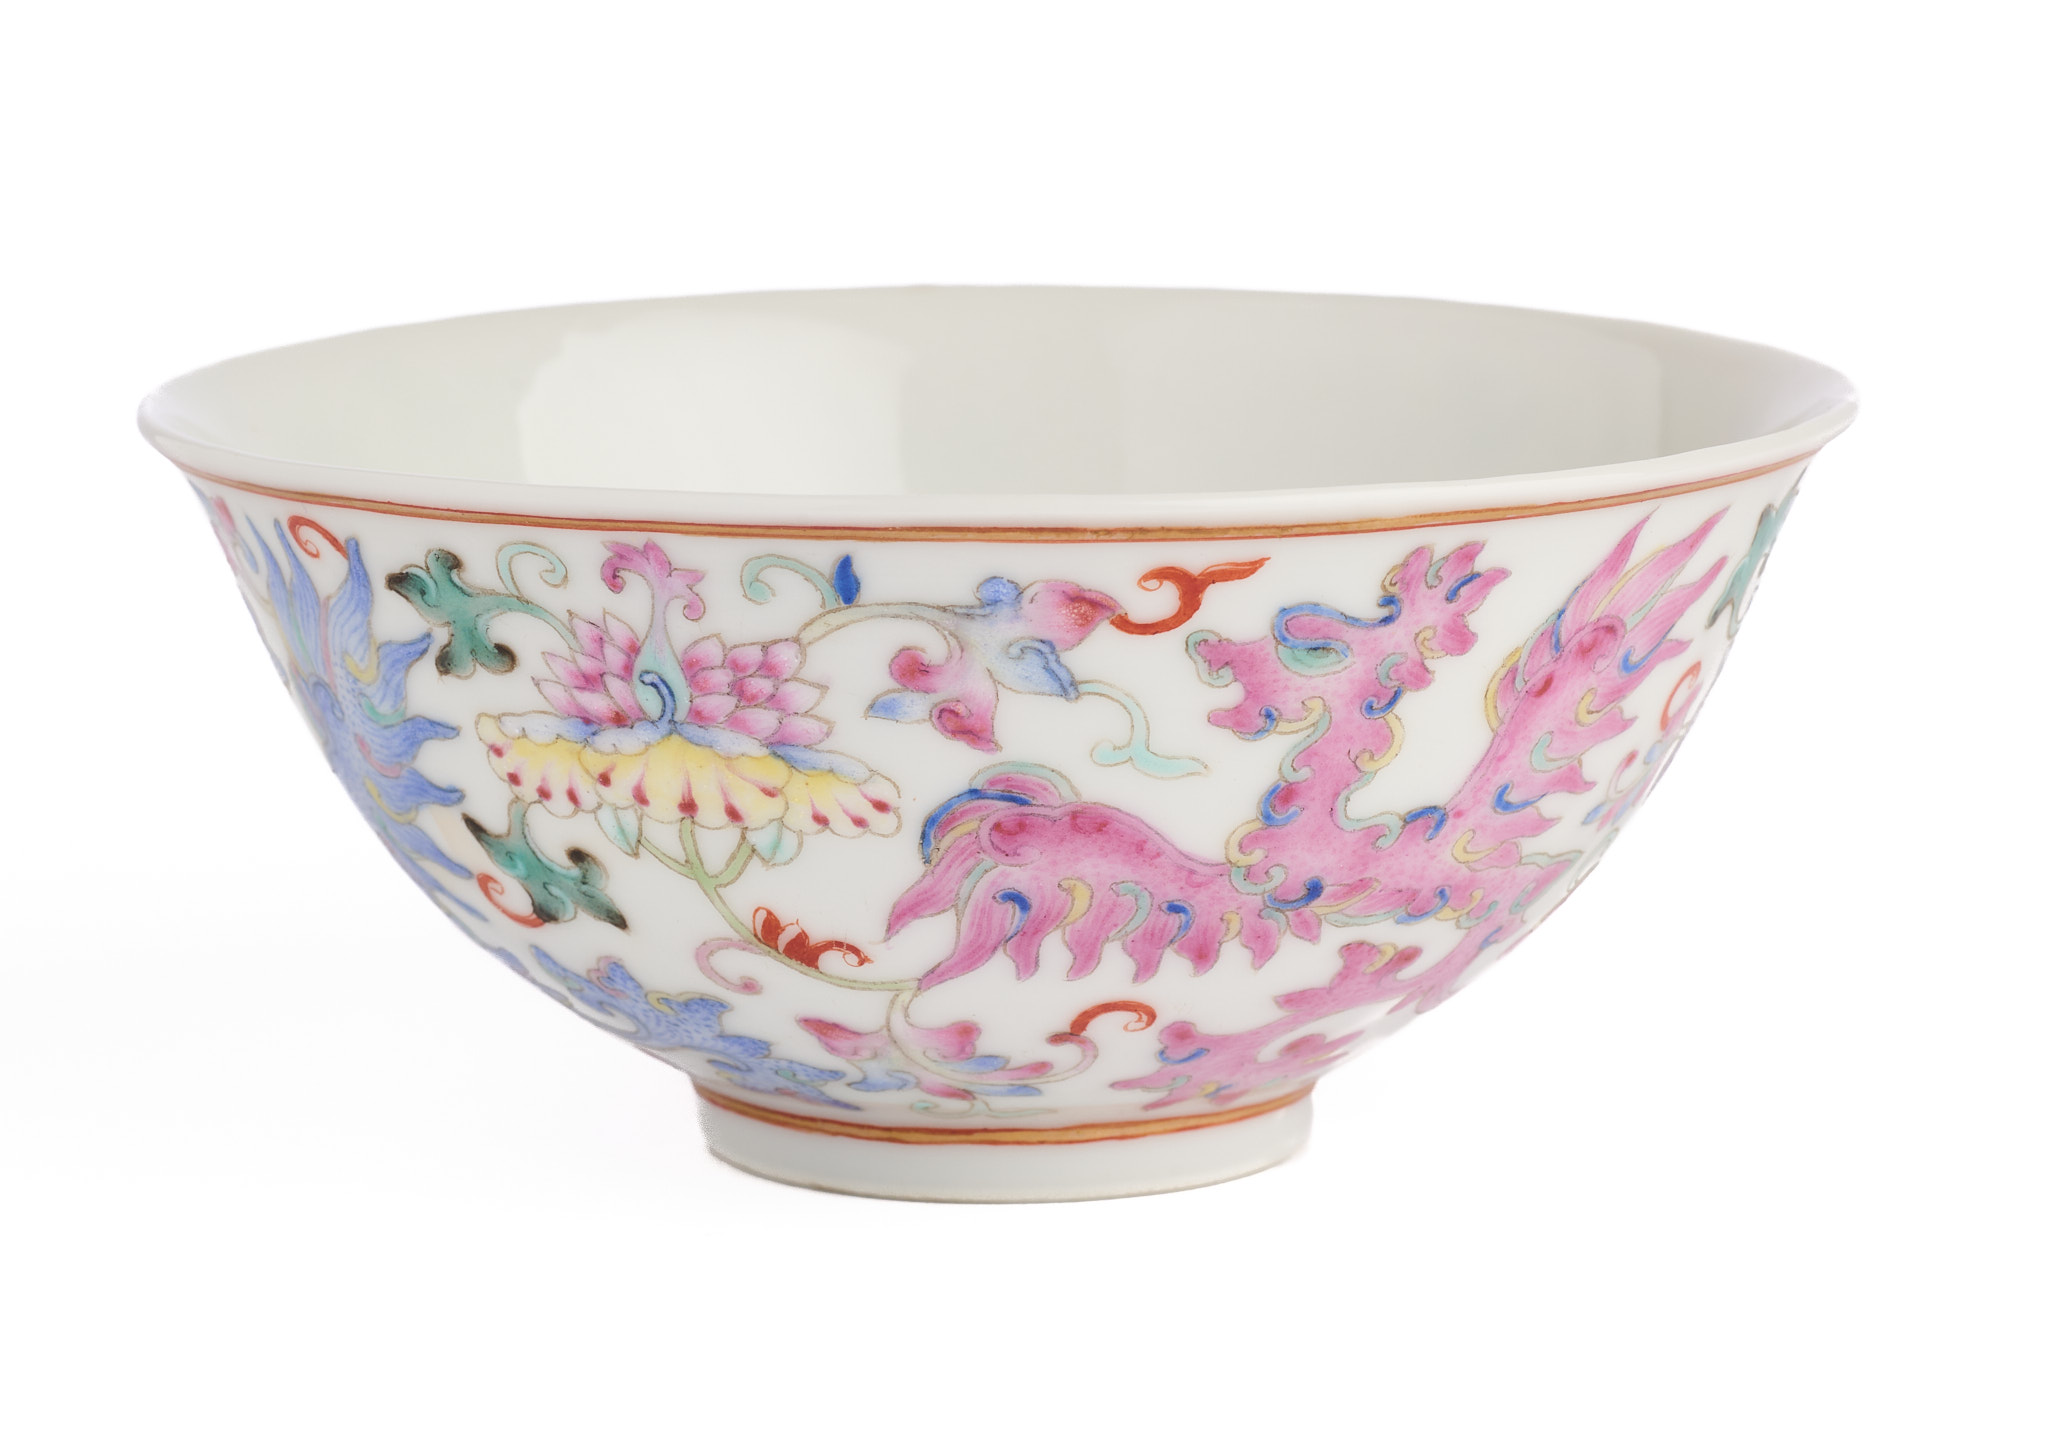 A CHINESE FAMILLE-ROSE 'PHOENIX' BOWL GUANGXU MARK AND PERIOD (1875-1908) - Image 2 of 2